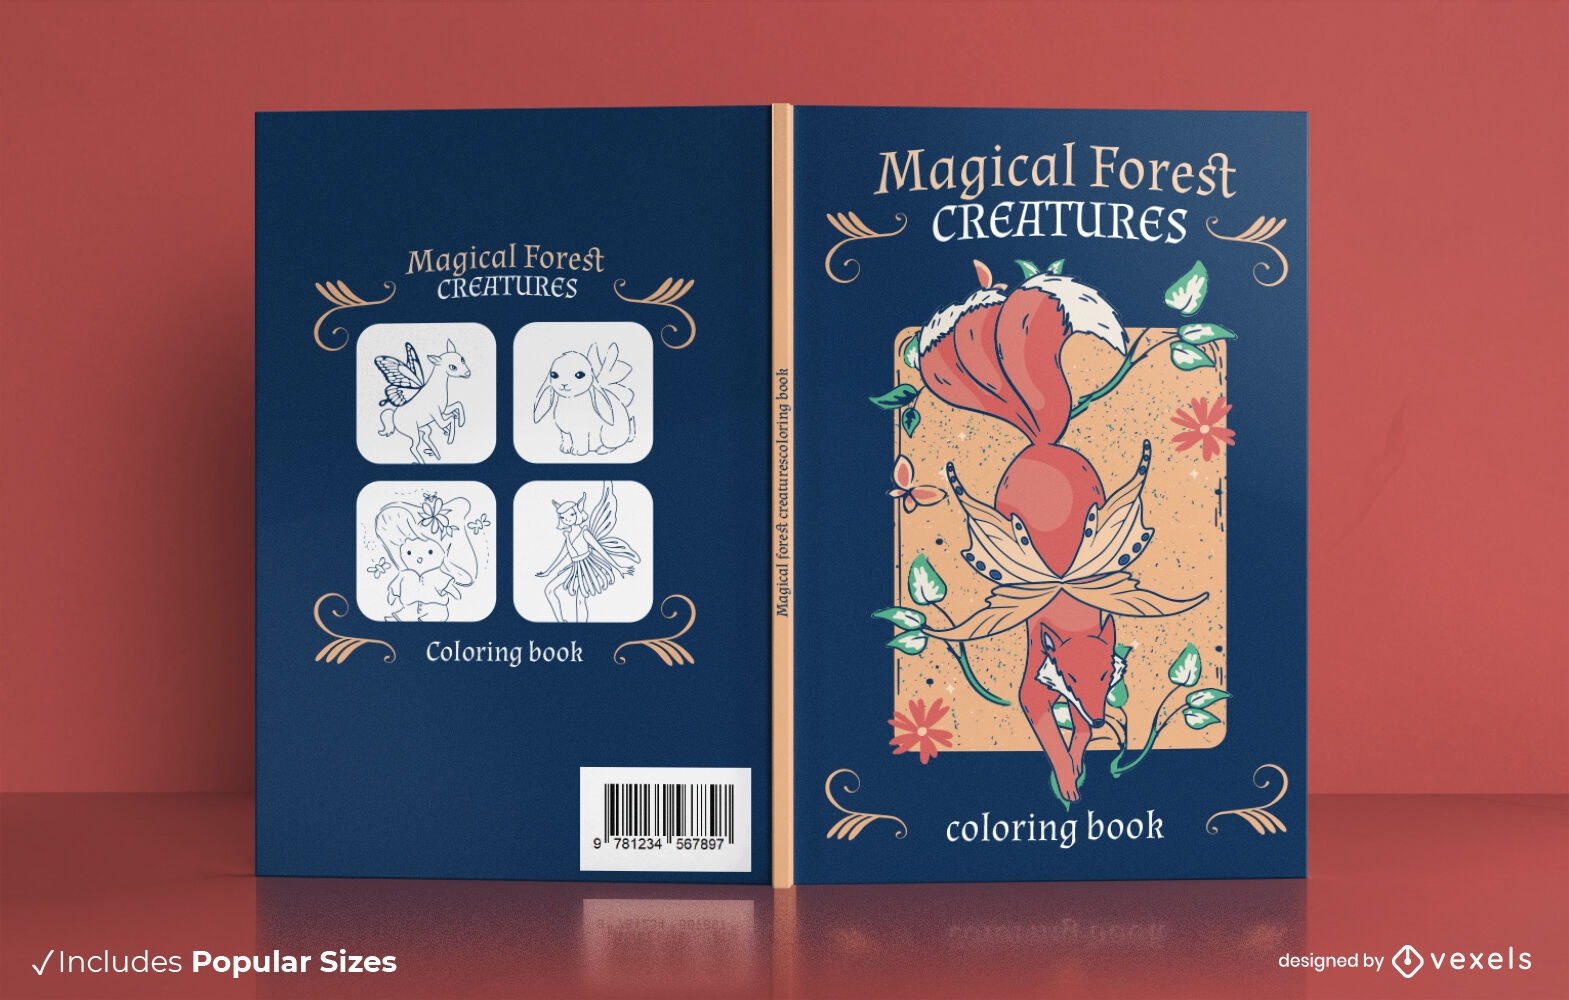 Magical forest creatures book cover design